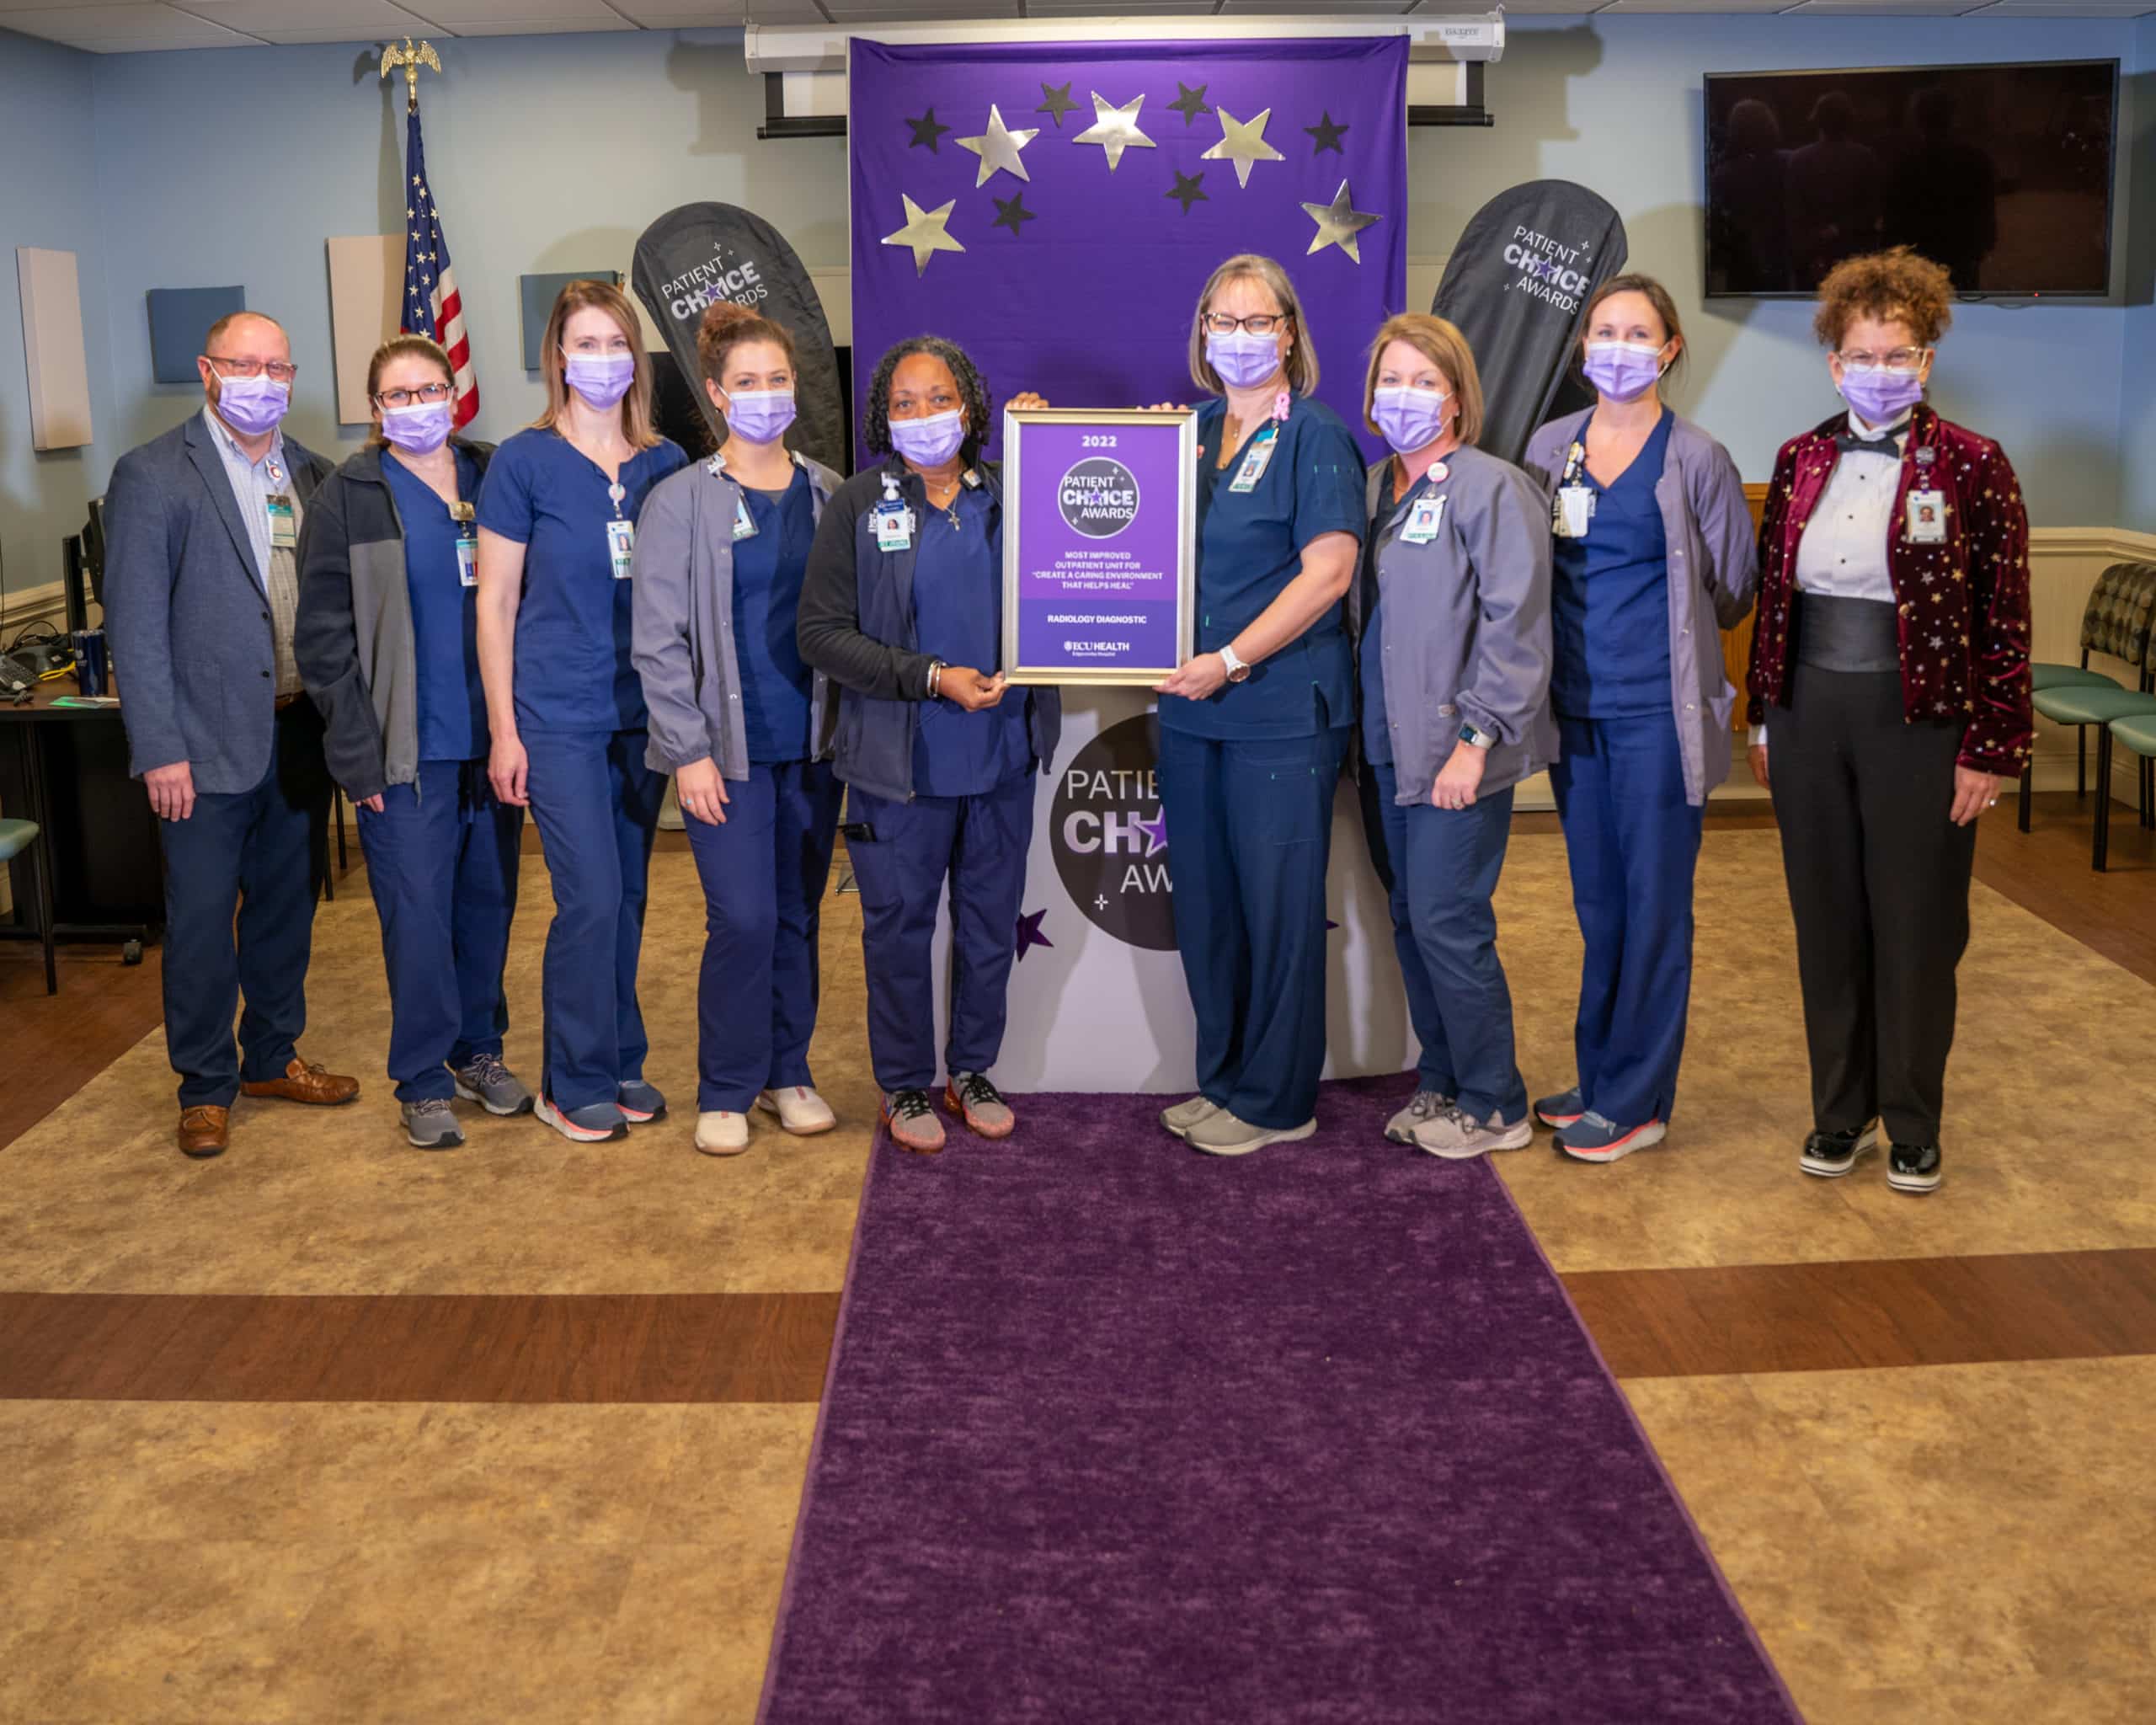 The ECU Health Edgecombe Hospital – Radiology Diagnostic team poses for a photo after being presented the Patient Choice Award for Most Improved Outpatient Unit for Creating a Caring Environment that Helps Heal.